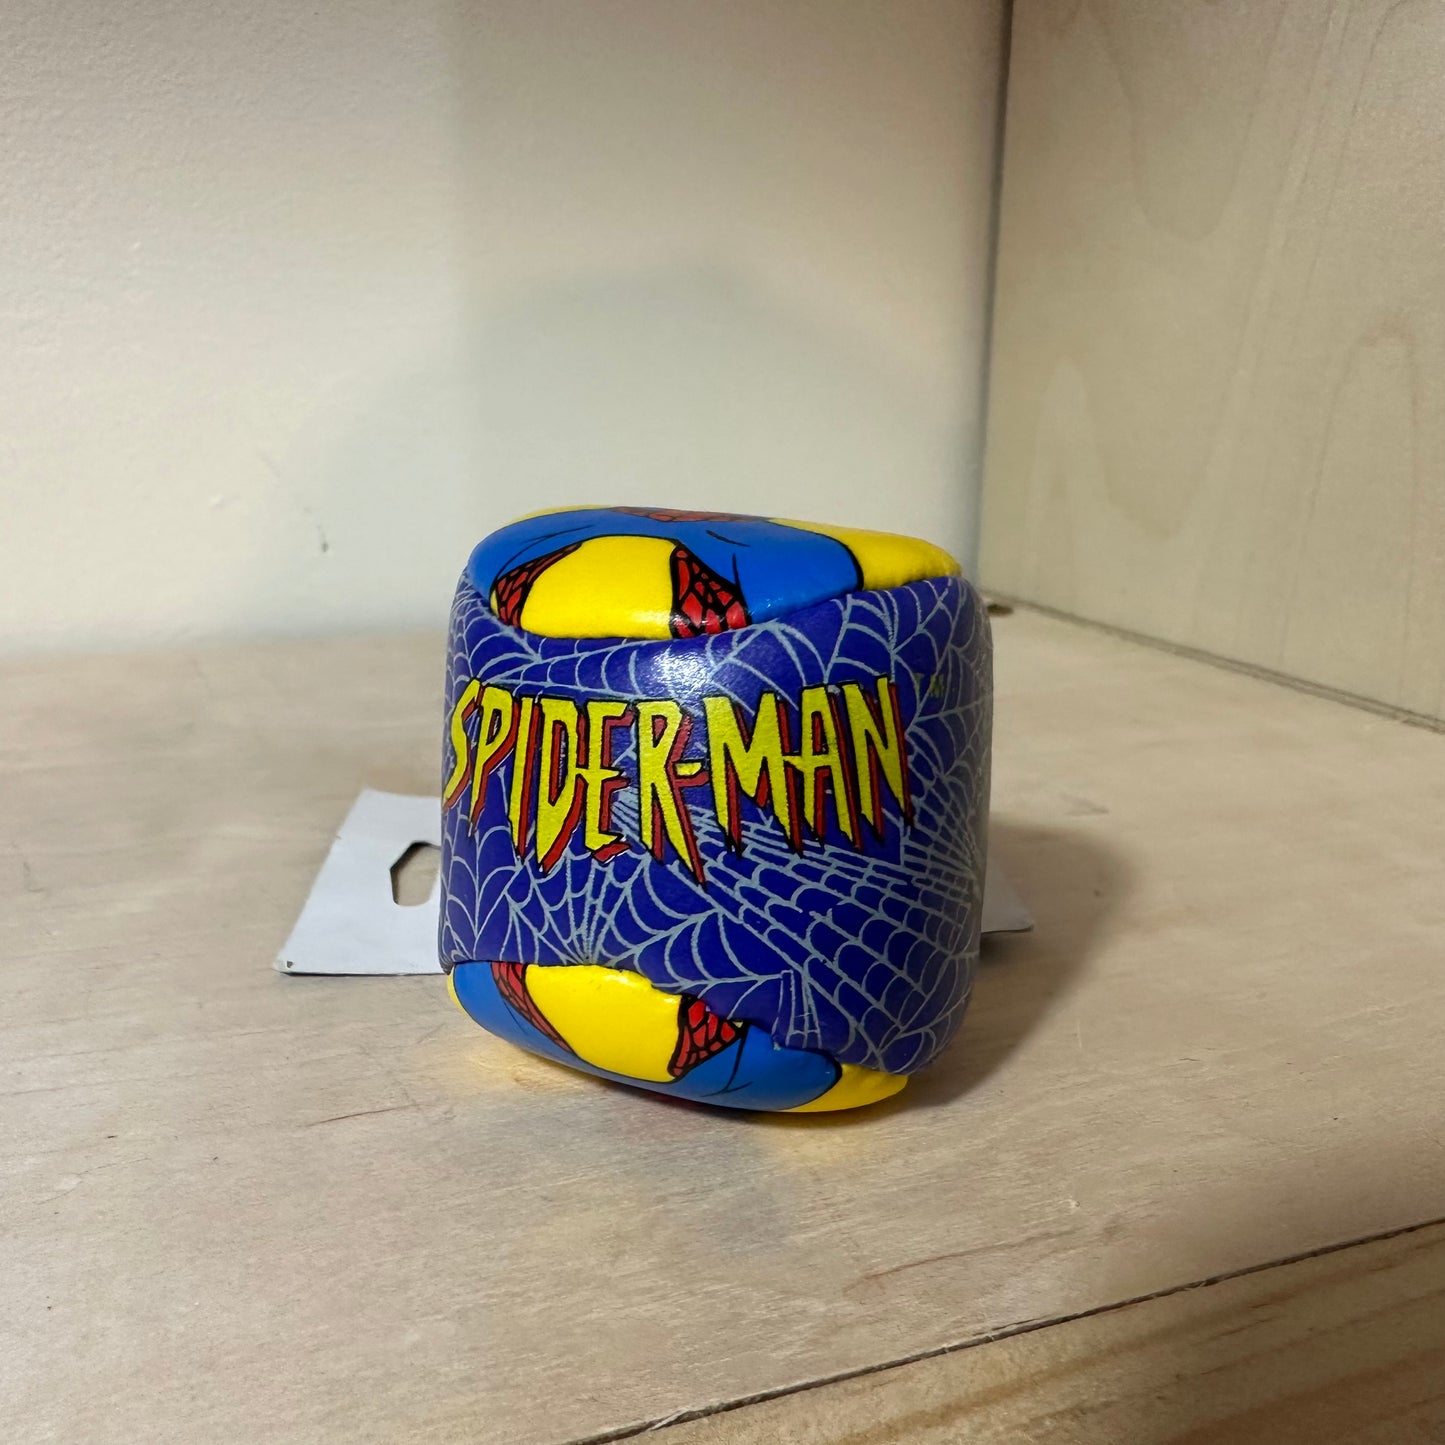 1995 Spider-Man Scrunch Hacky Sack Ball Brand New with Tag